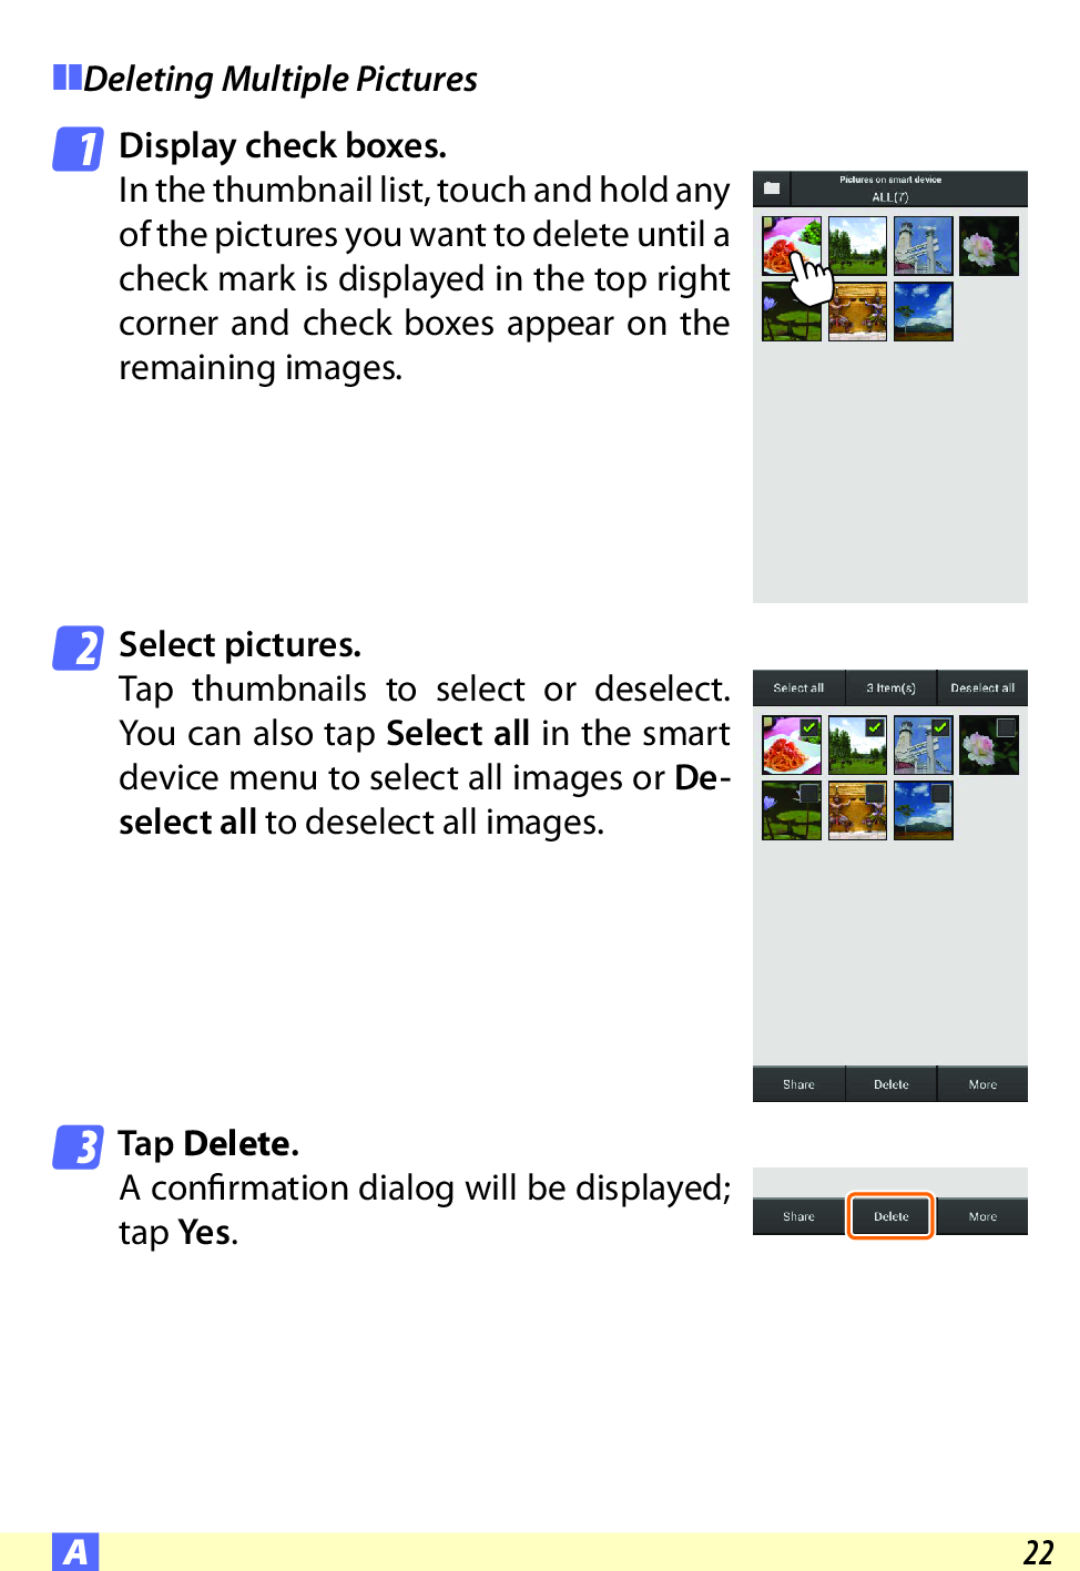 Nikon D600 user manual zzDeleting Multiple Pictures, Tap Delete, Display check boxes, Select pictures 